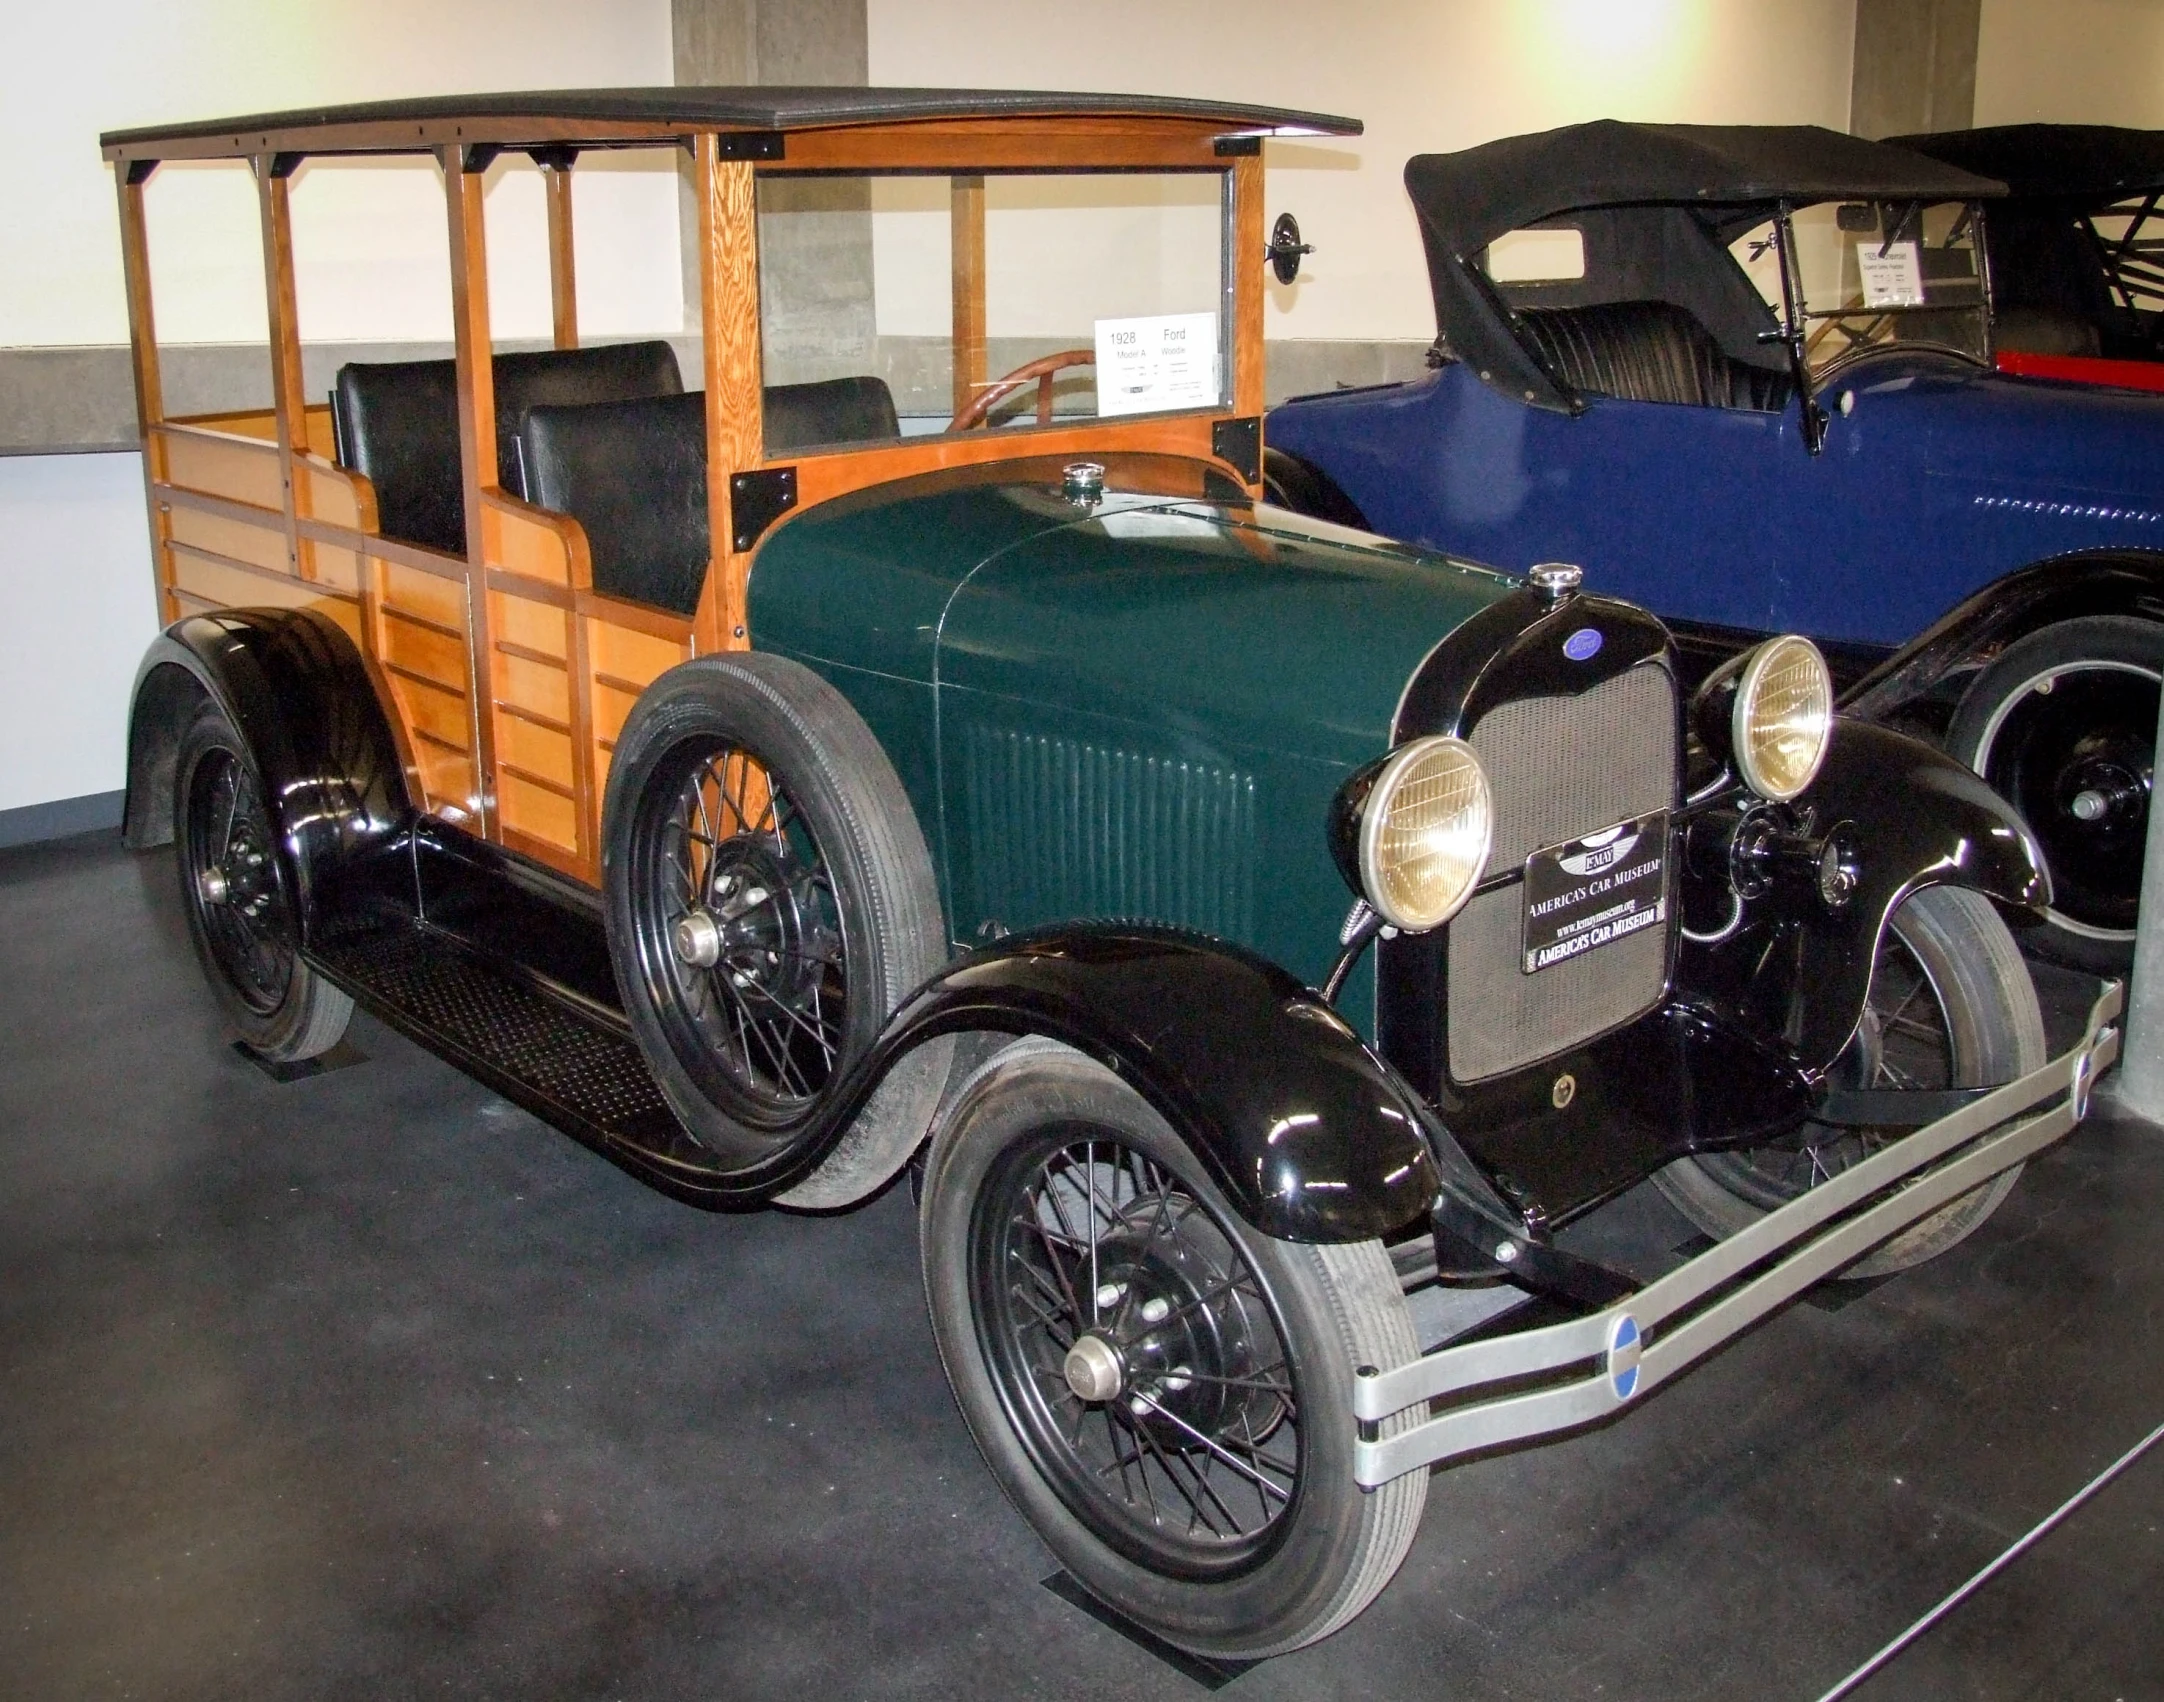 an old fashioned car is on display at a museum